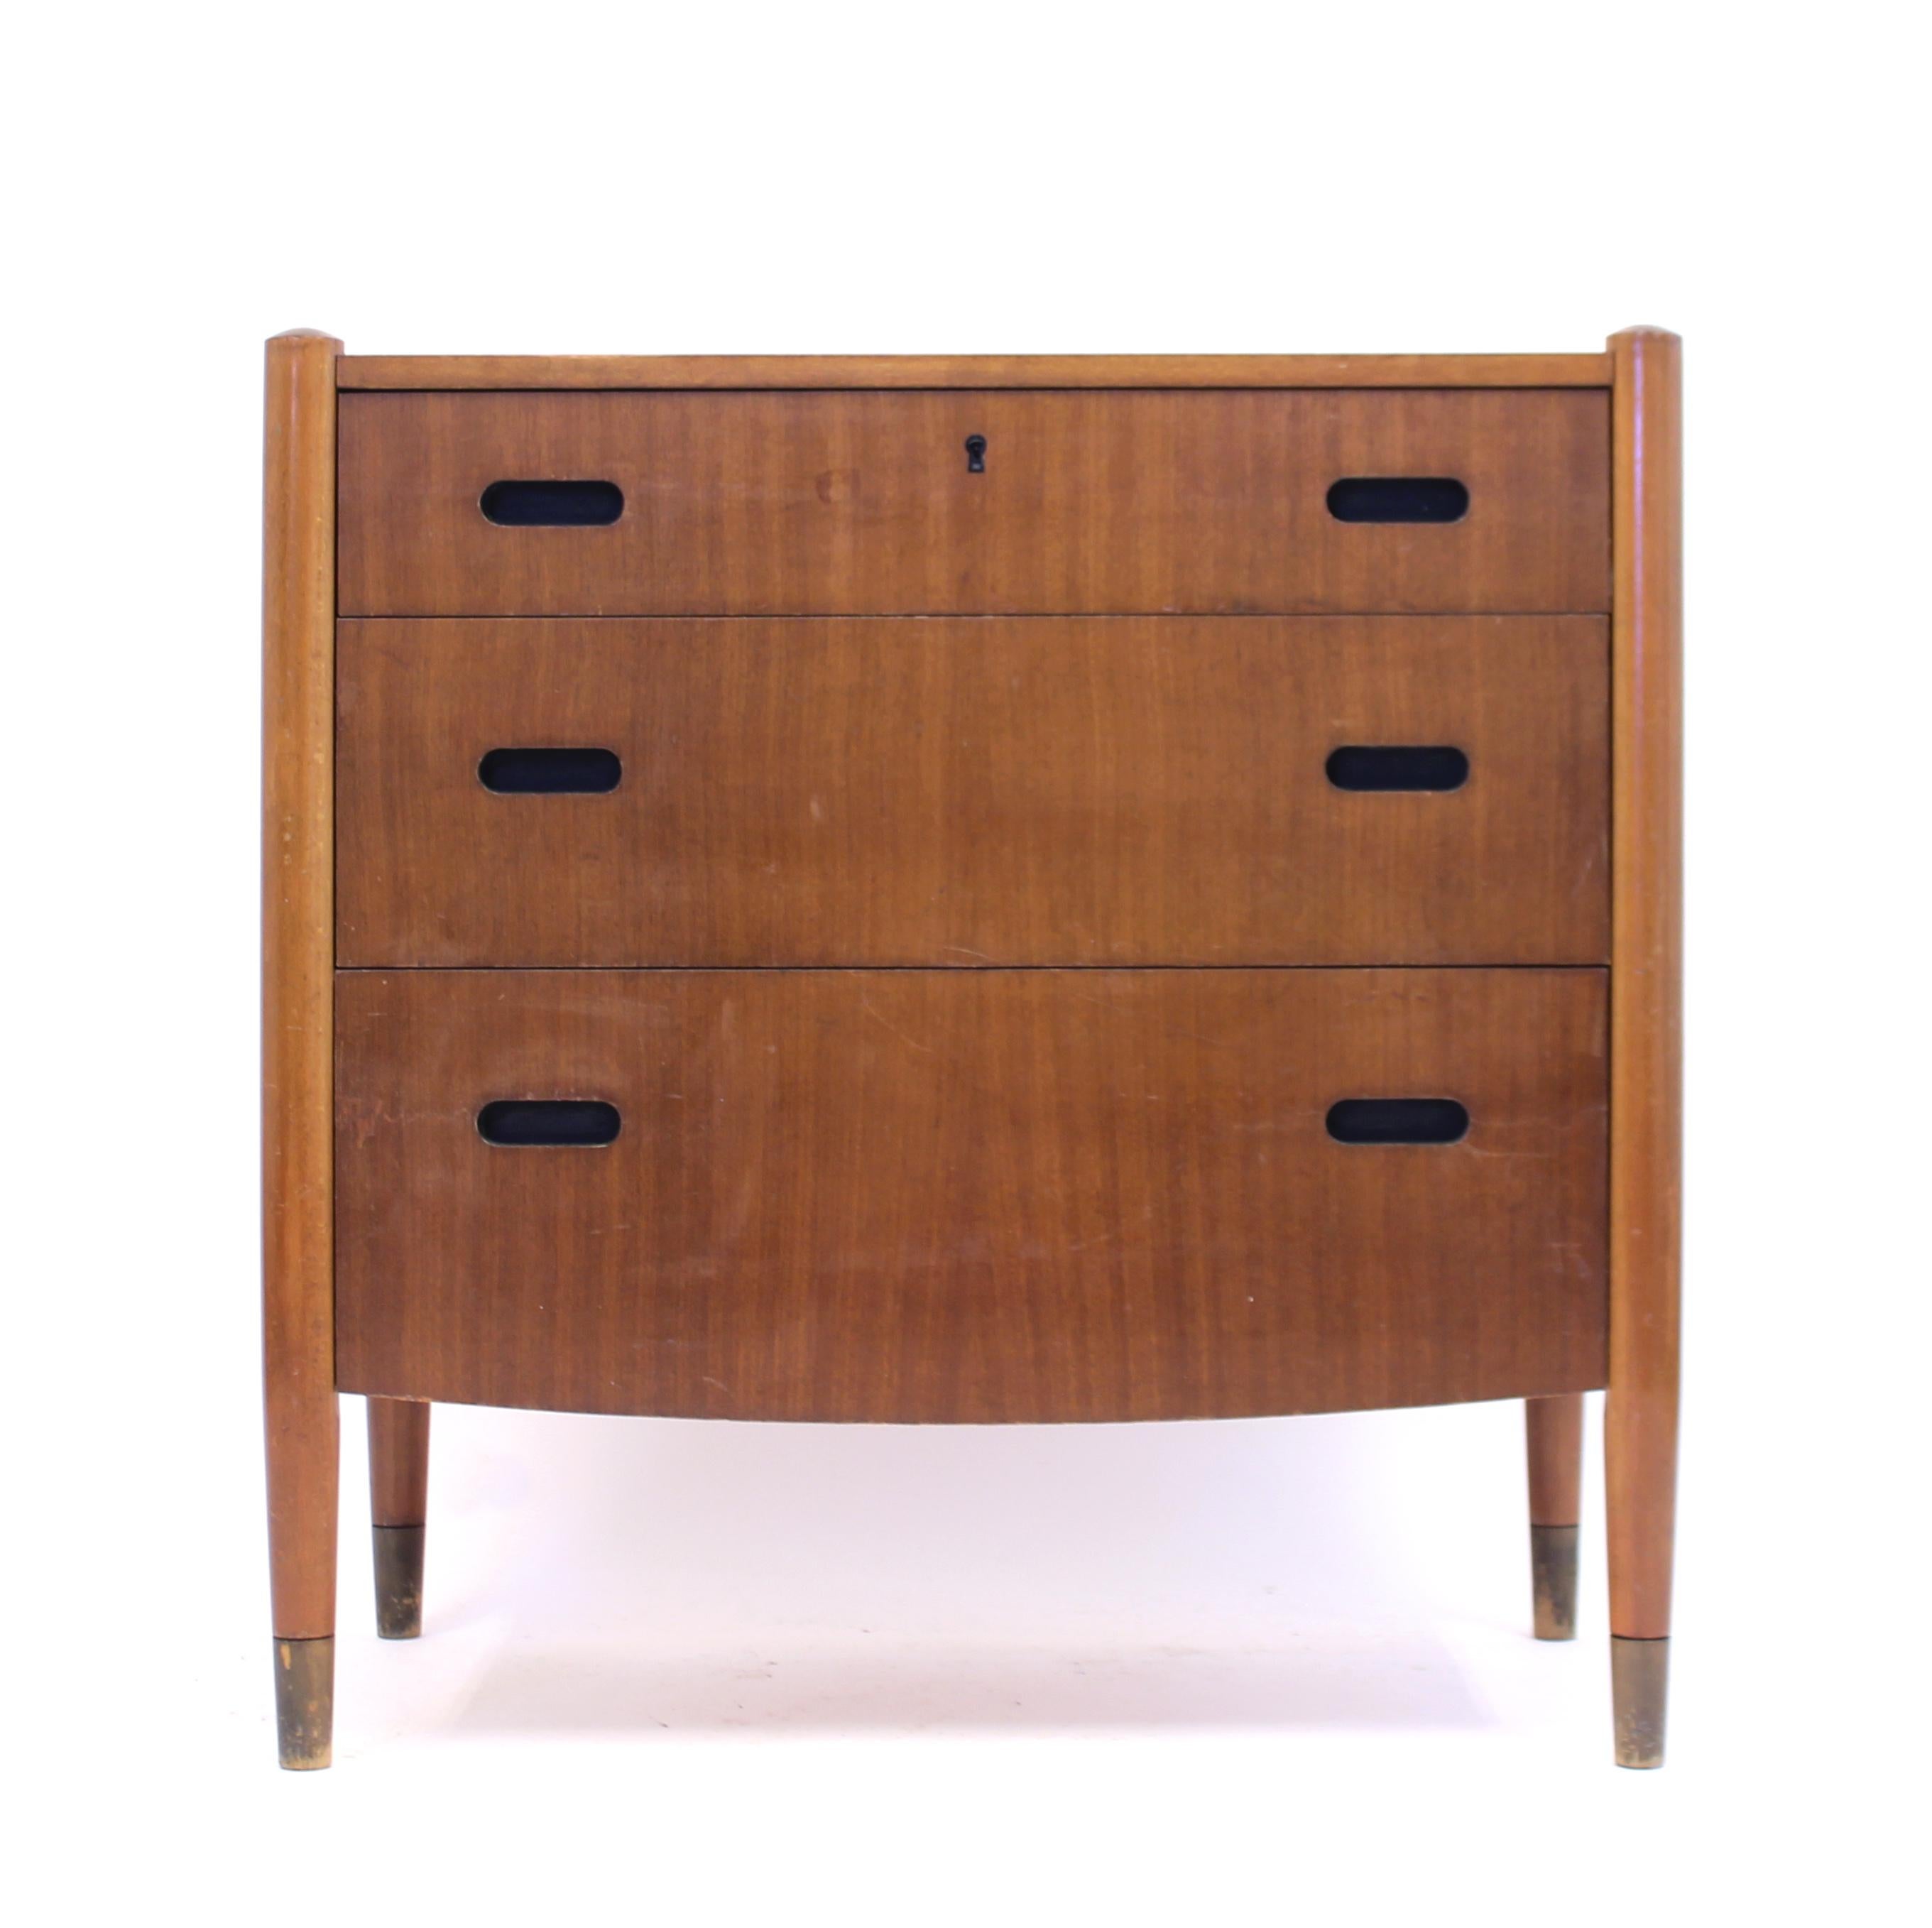 Swedish mid-century Zebrano chest of drawers in a minimalist style. Unusual detail  of the lowest drawer that is slightly curved at the bottom which makes the overall shape a bit more interesting. The handles are just cut two out wholes at the front